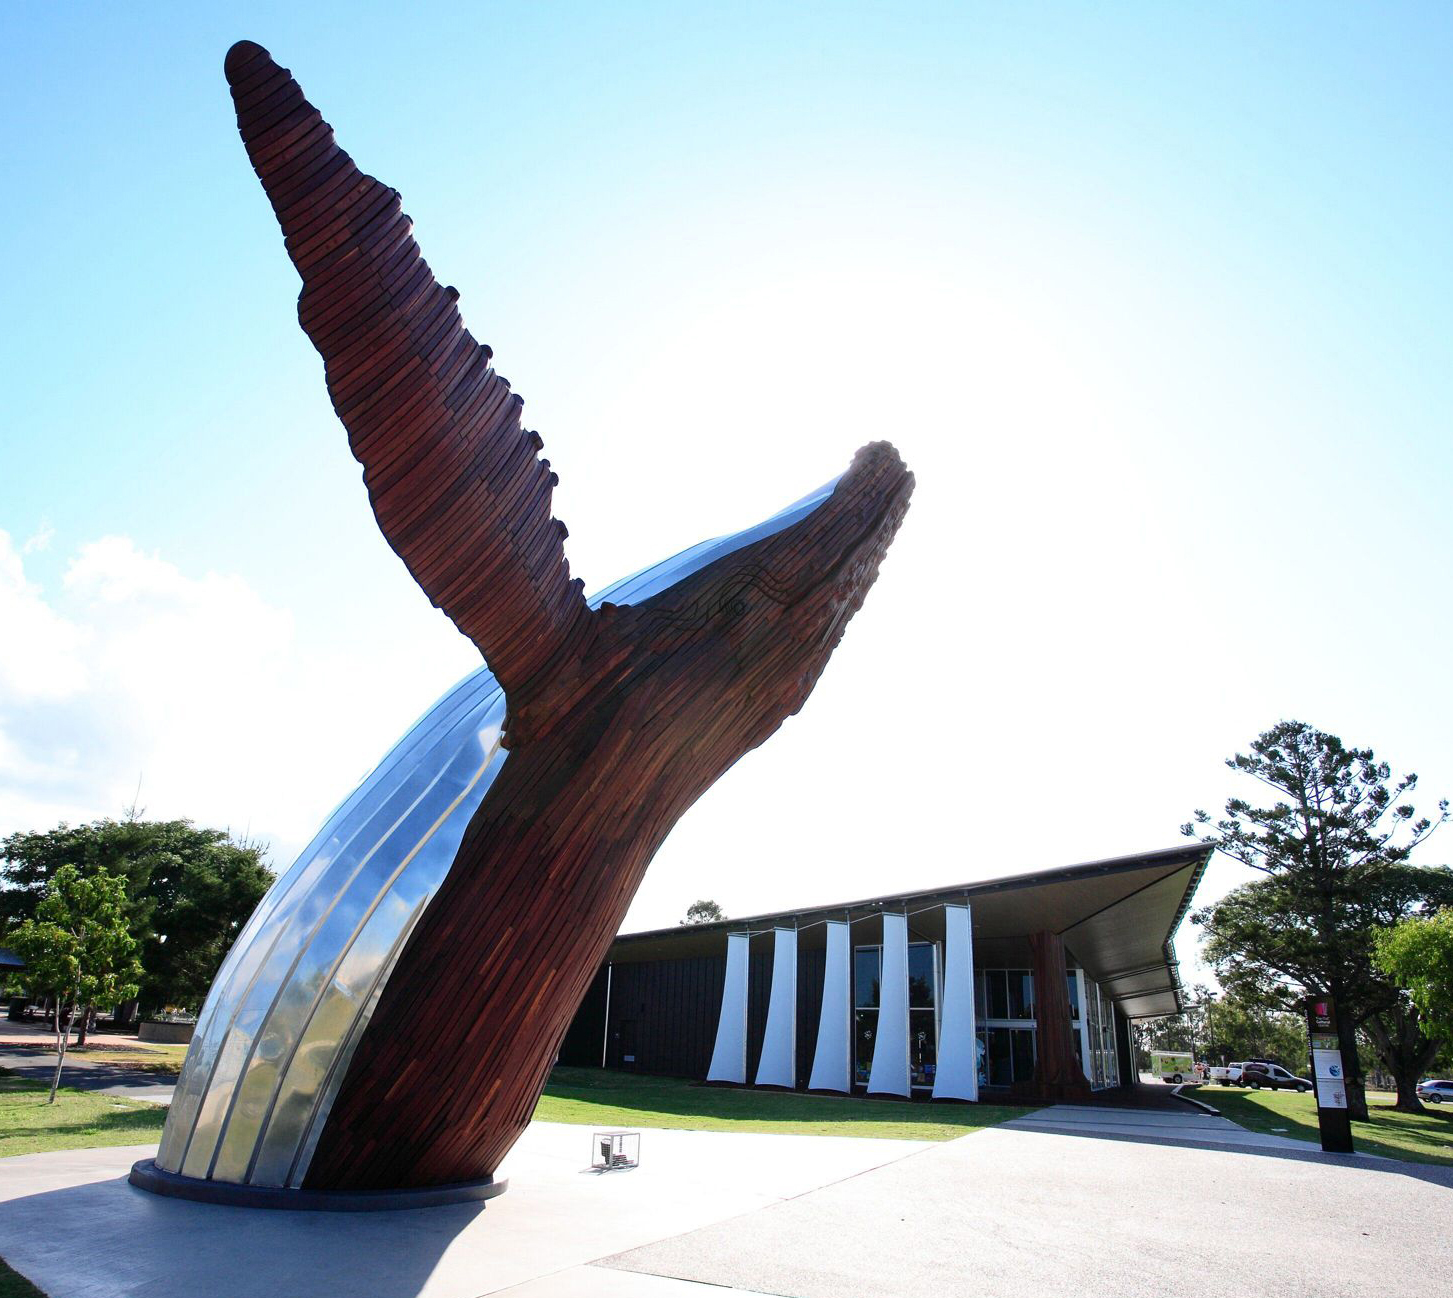 Hervey Bay Regional Gallery with Nala the Whale Statue in foreground